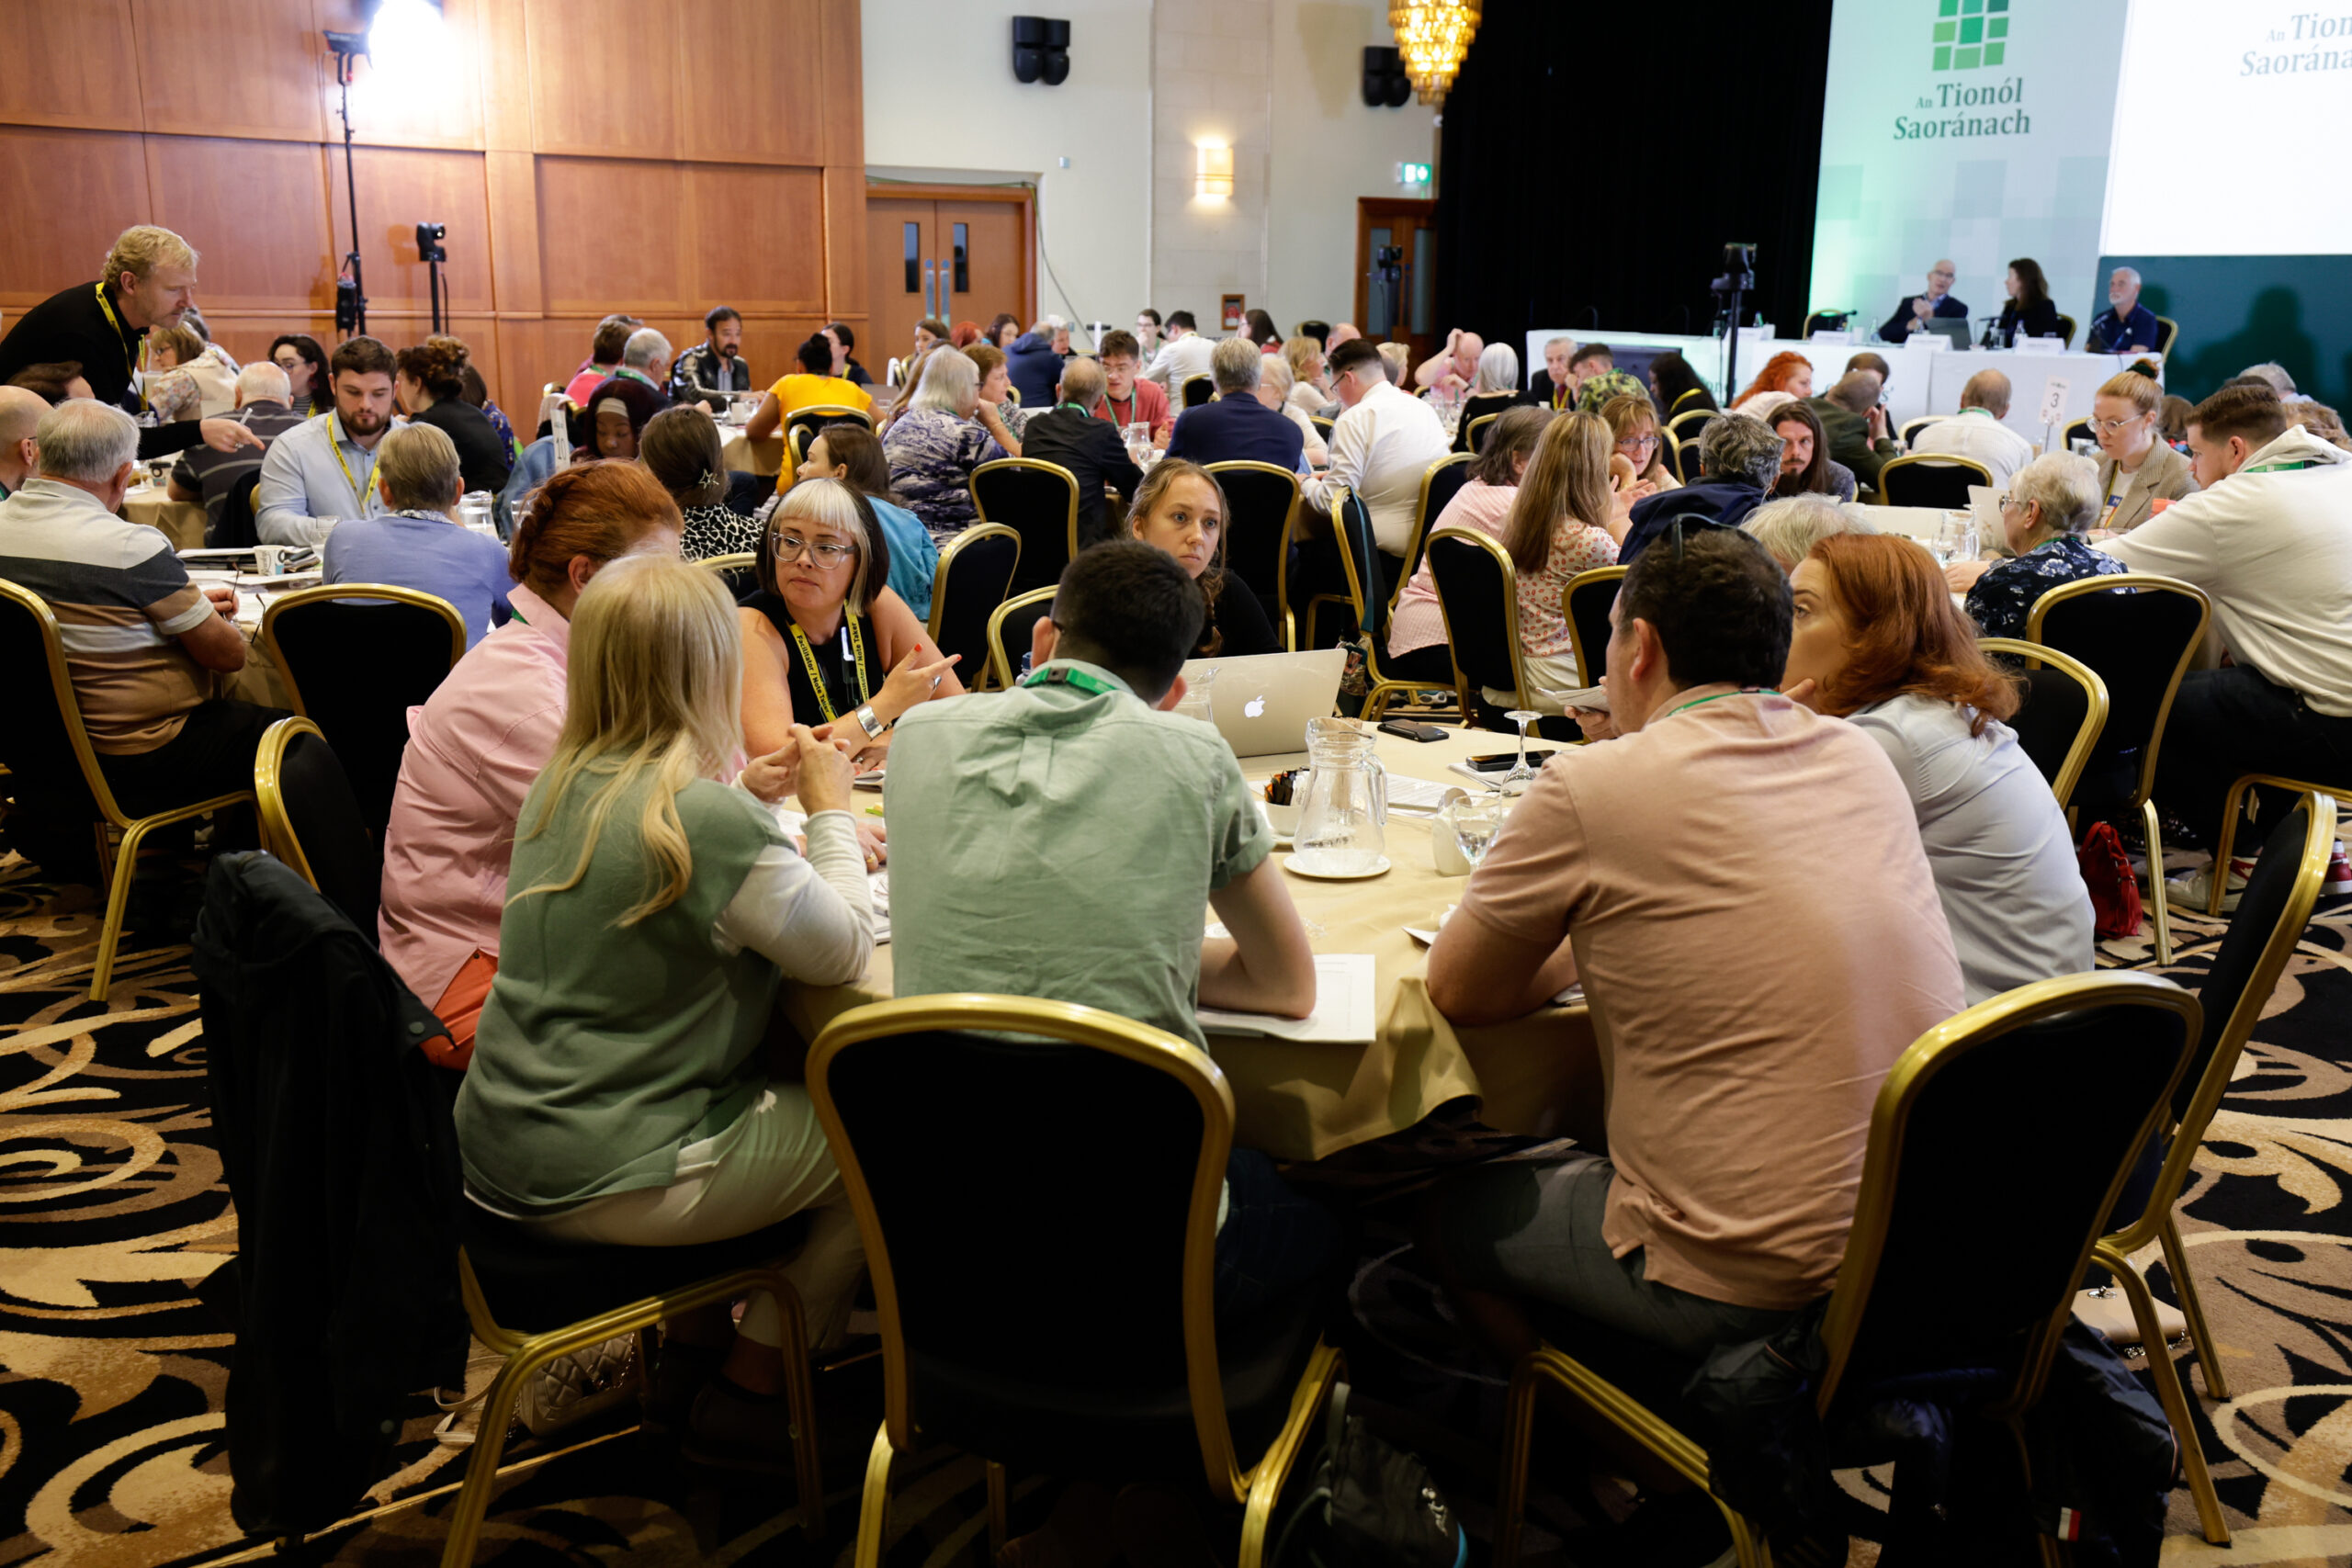 Citizens’ Assembly on Drugs Use concludes substantive discussions – Assembly to reconvene later in October to agree recommendations